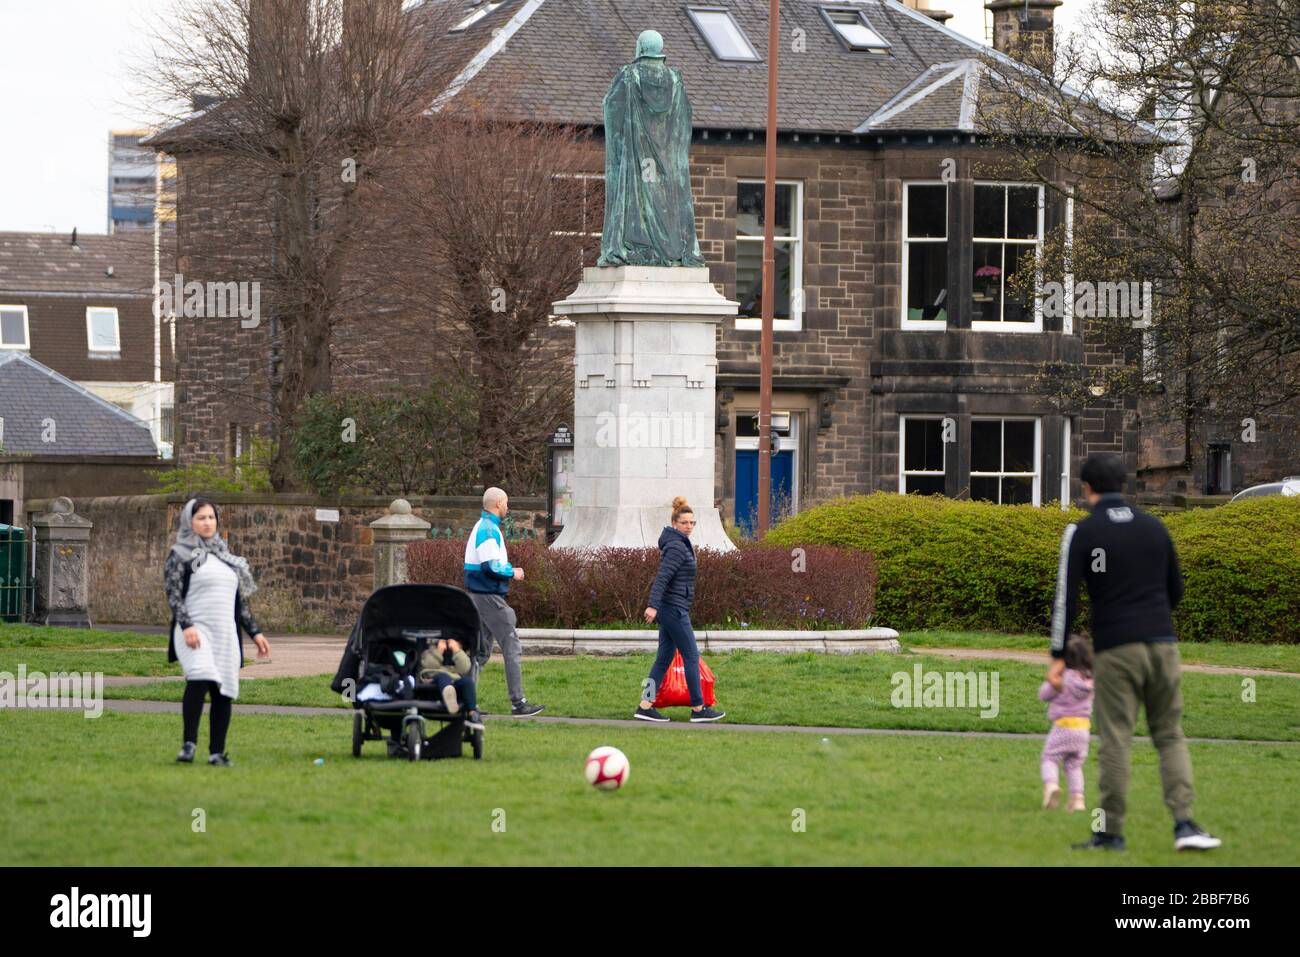 Edinburgh, Scotland, UK. 31 March, 2020. Police patrol public parks and walking areas to enforce the coronavirus lockdown regulations about being outdoor. Family outside in Victoria Park playing football. Iain Masterton/Alamy Live News Stock Photo